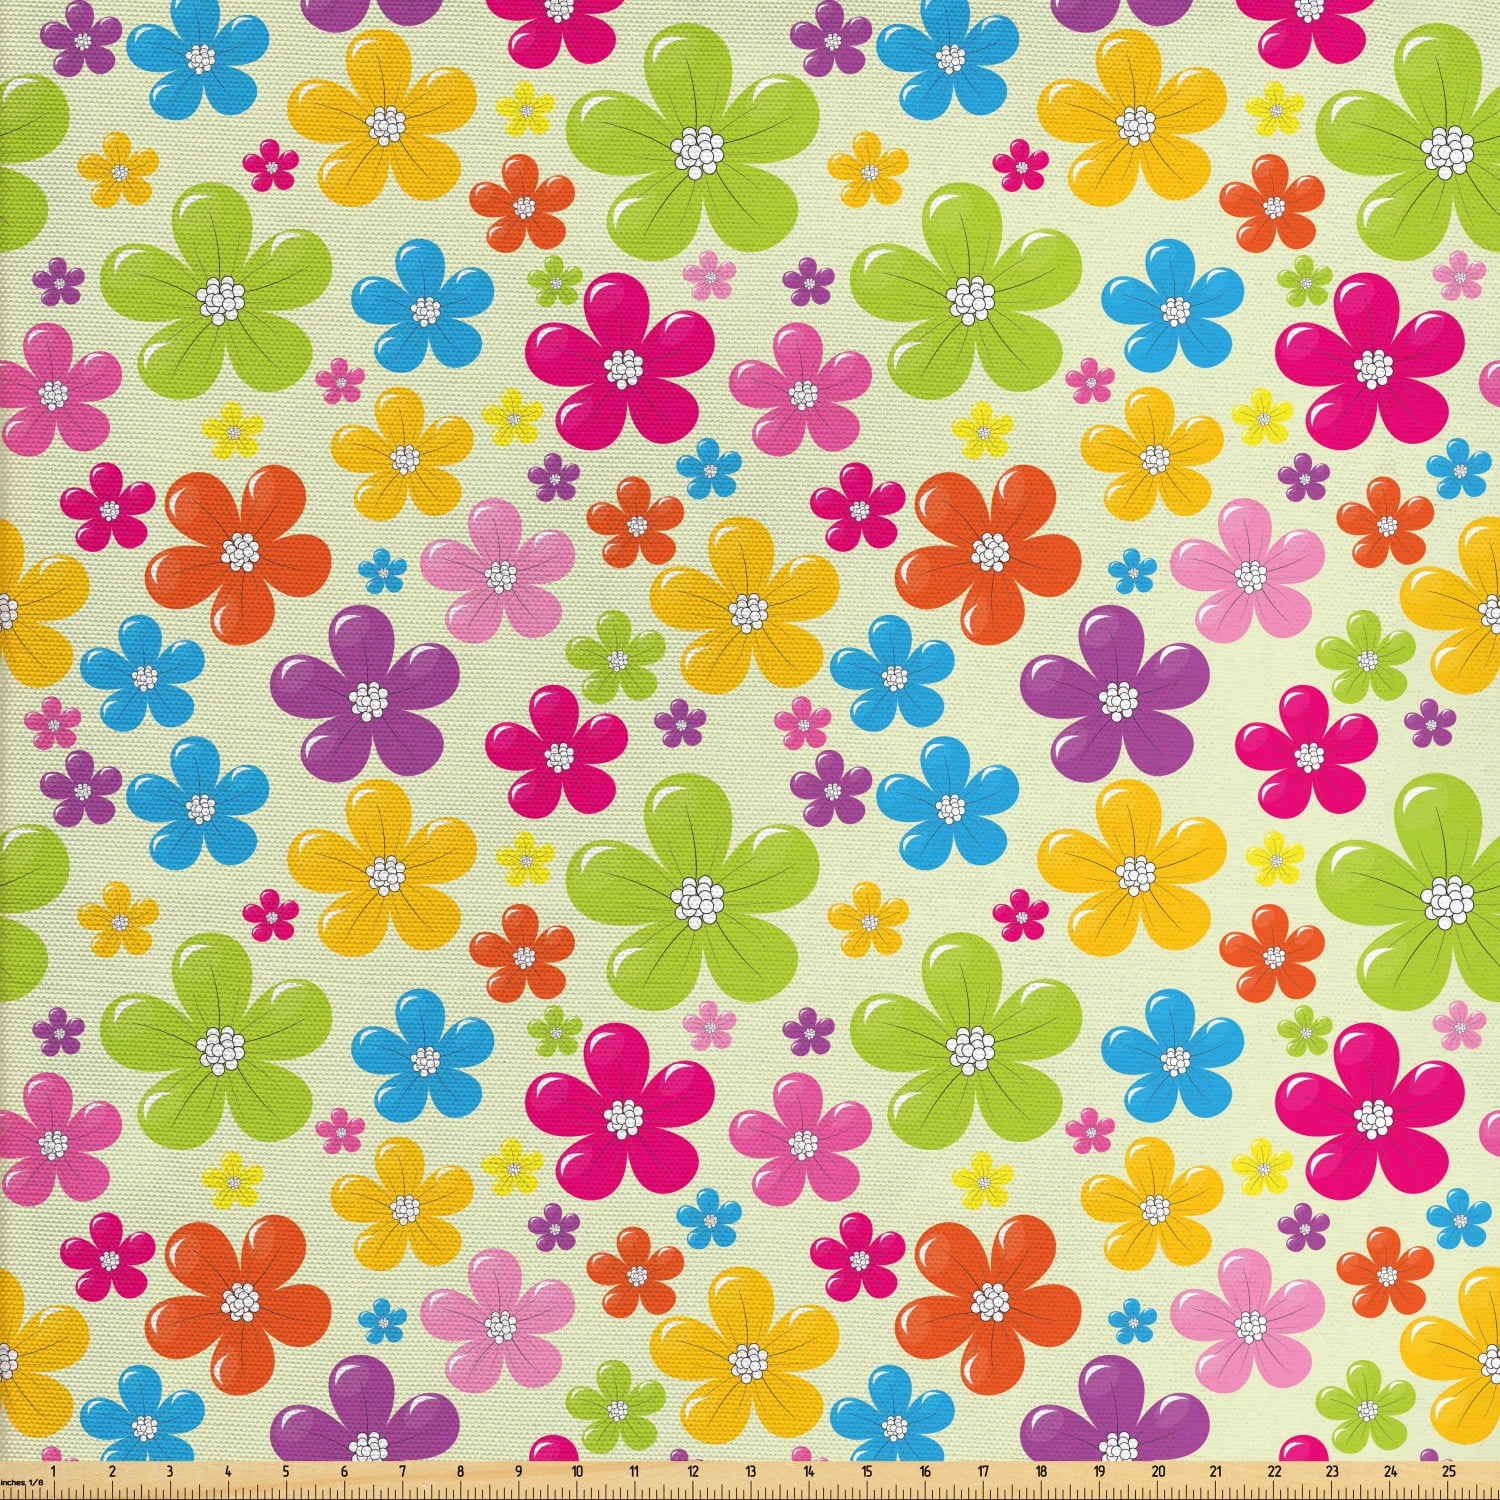 Hippie Fabric by the Yard, Sixties Style Illustration with Peace and Love  Themes Hearts Flowers and Circles, Decorative Upholstery Fabric for Chairs  & Home Accents, 2 Yards, Multicolor by Ambesonne 